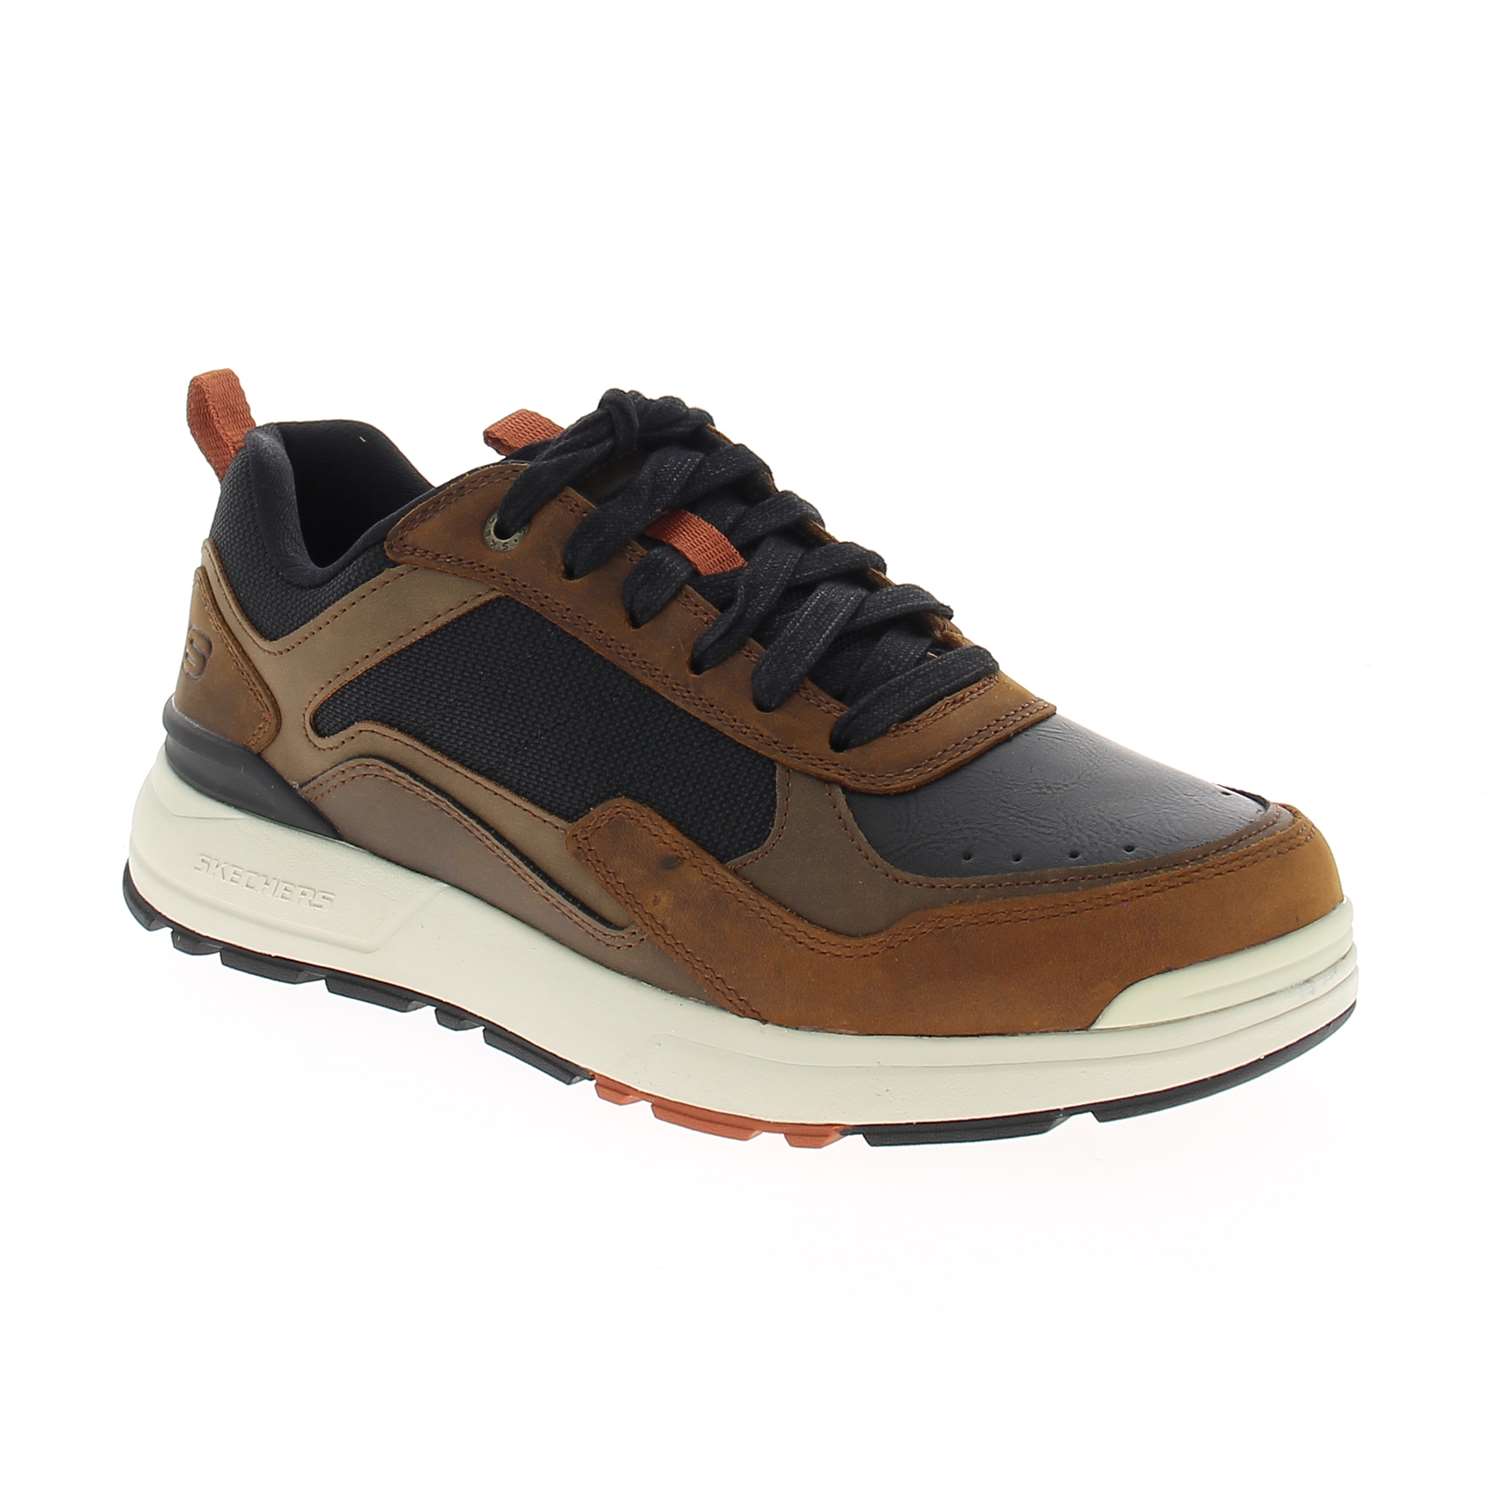 01 - ROZIER RELAXED FIT - SKECHERS - Chaussures à lacets - Nubuck